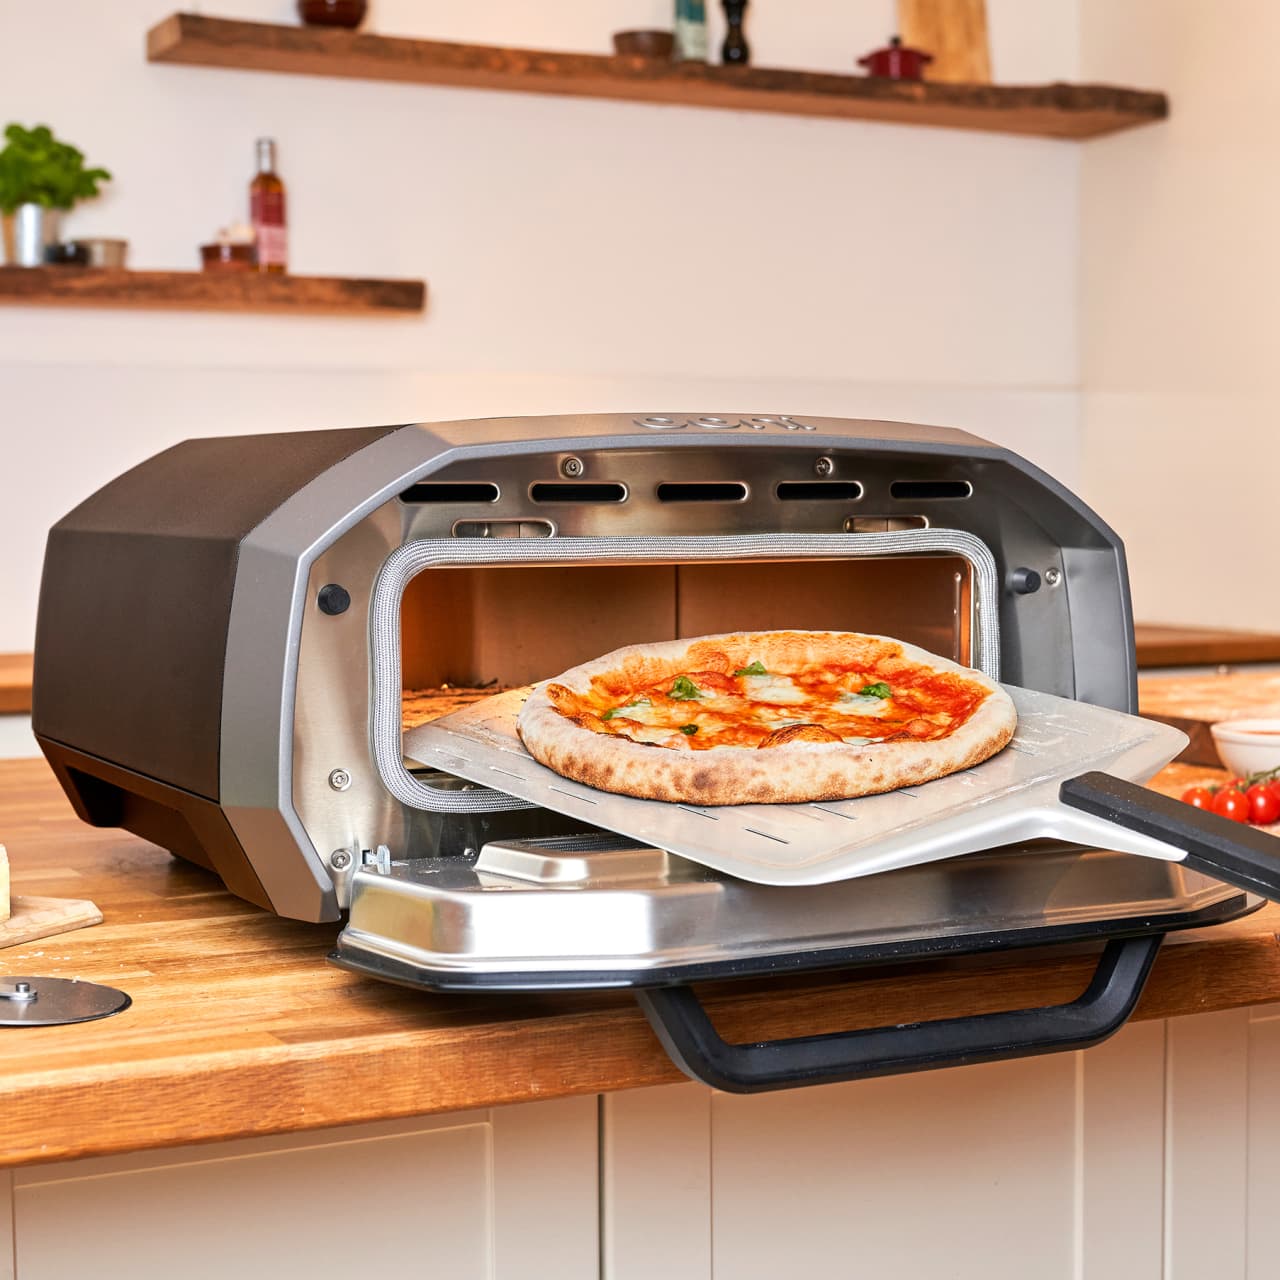 The Trendiest Thing That Adds Value to Your Home: a Pizza Oven